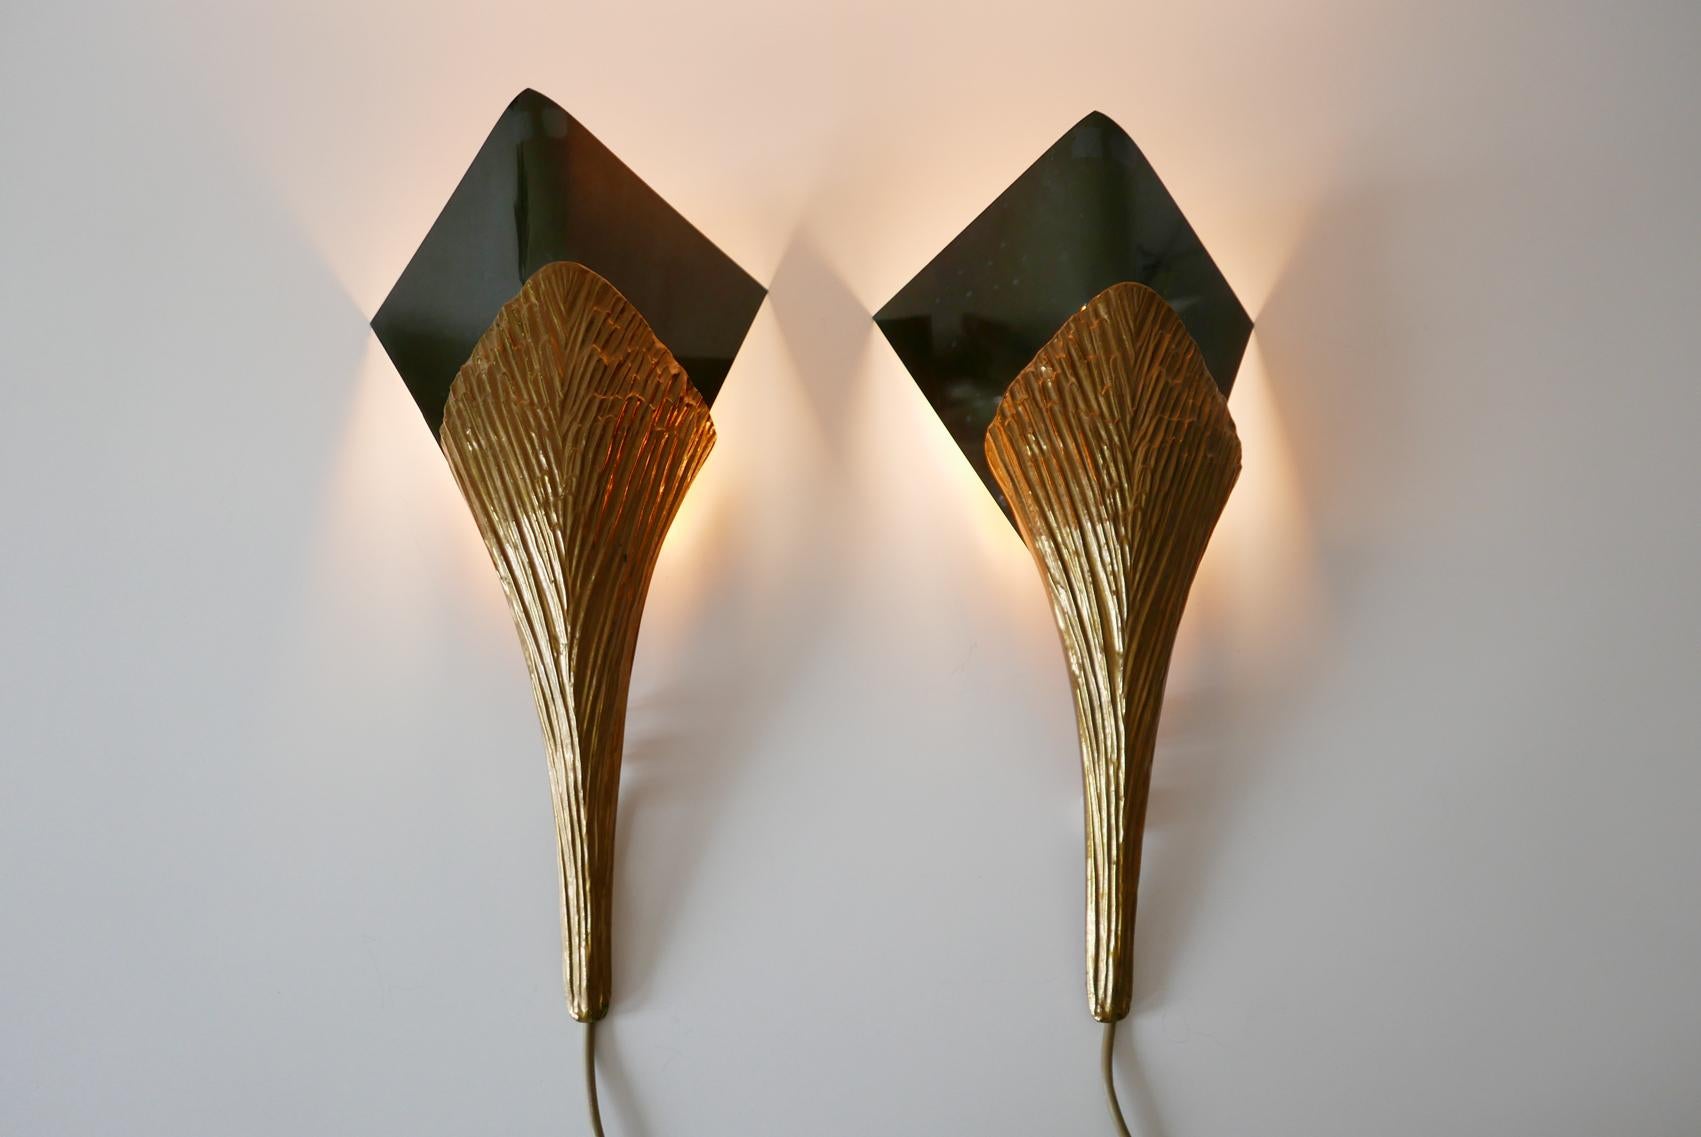 Set of two impressive Nefertiti wall lamps / sconces in bronze. Designed by Chrystiane Charles. Handmade by Charles Paris.

Executed in bronze and brass, each lamp needs 1 x E27 Edison screw fit bulb. Delivery without bulbs. It runs both on 110 /